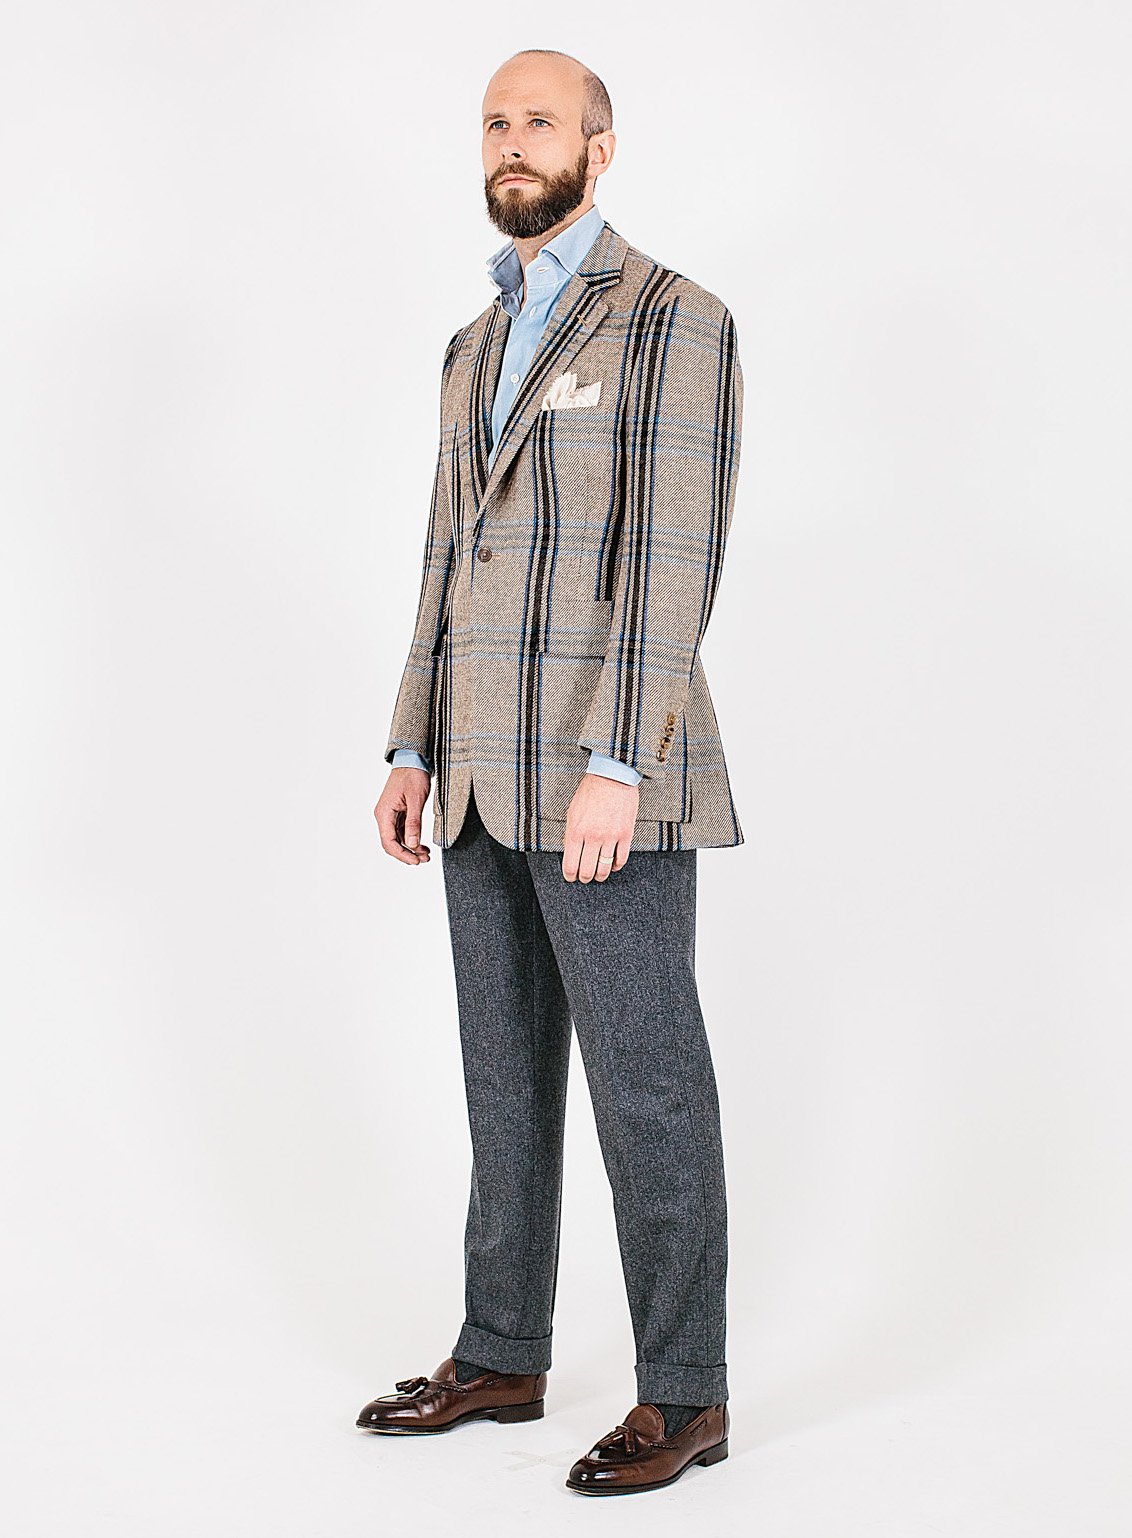 Suit style 2: The single breasted – Permanent Style